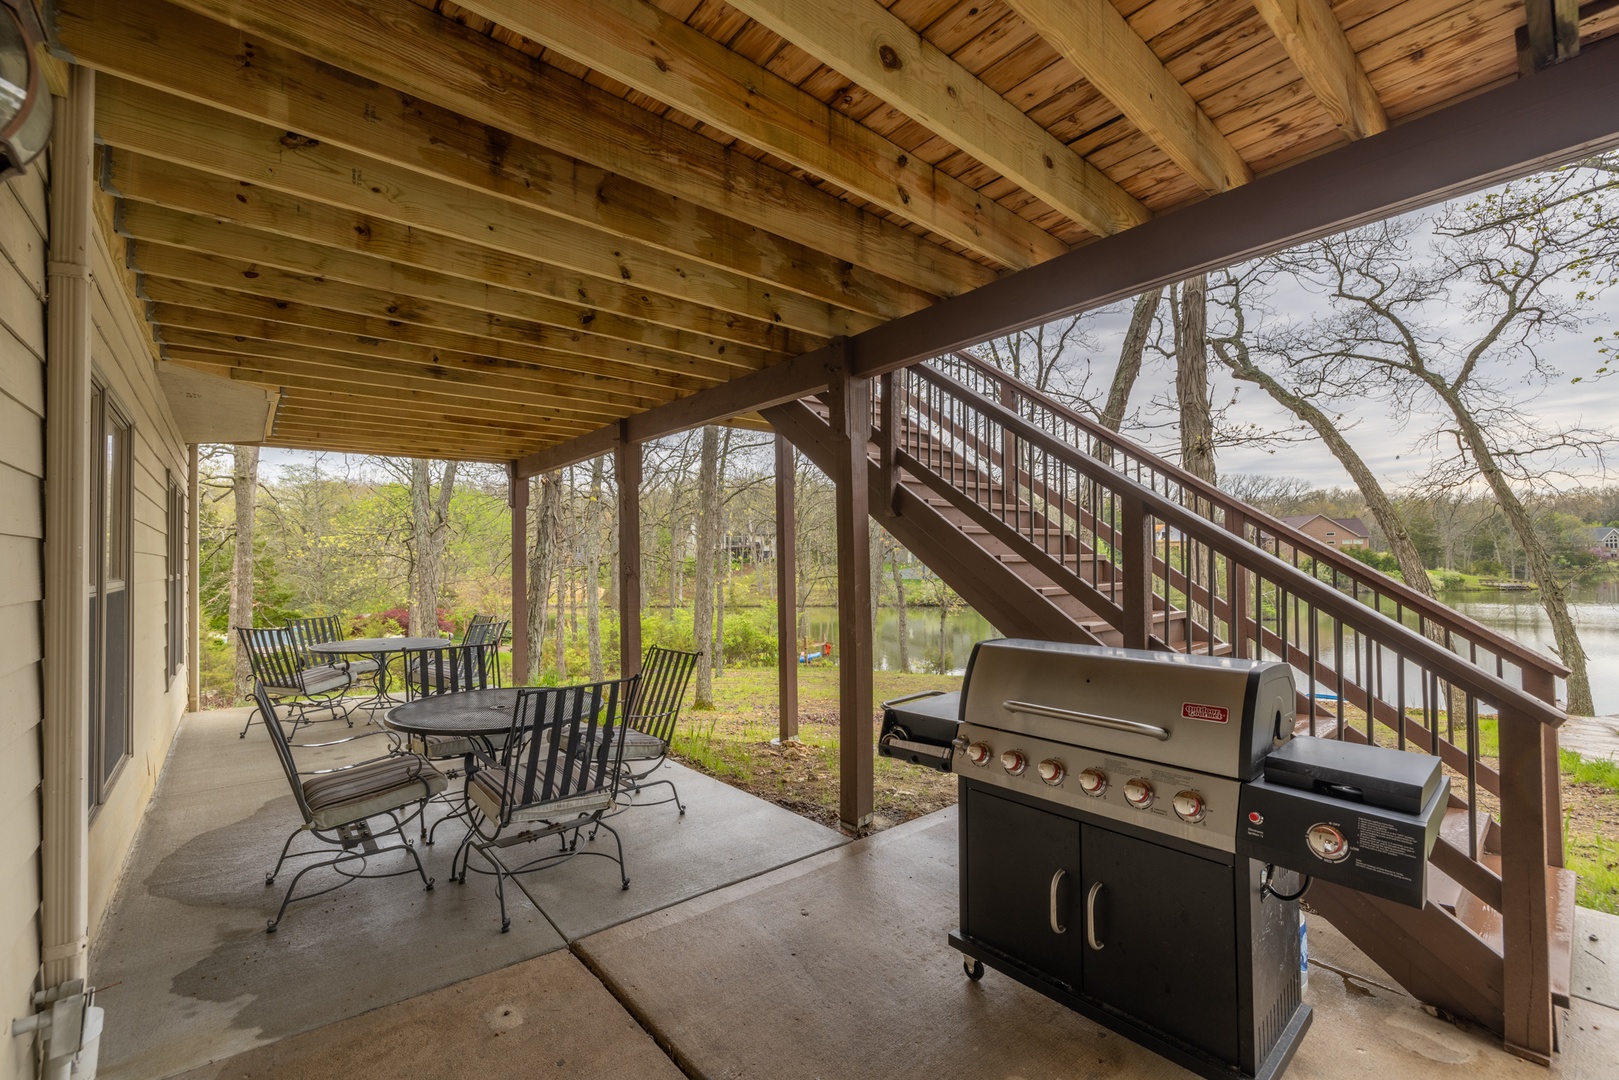 No matter the weather, spend time outdoors on the covered patio, or grill up your favorites on the gas grill